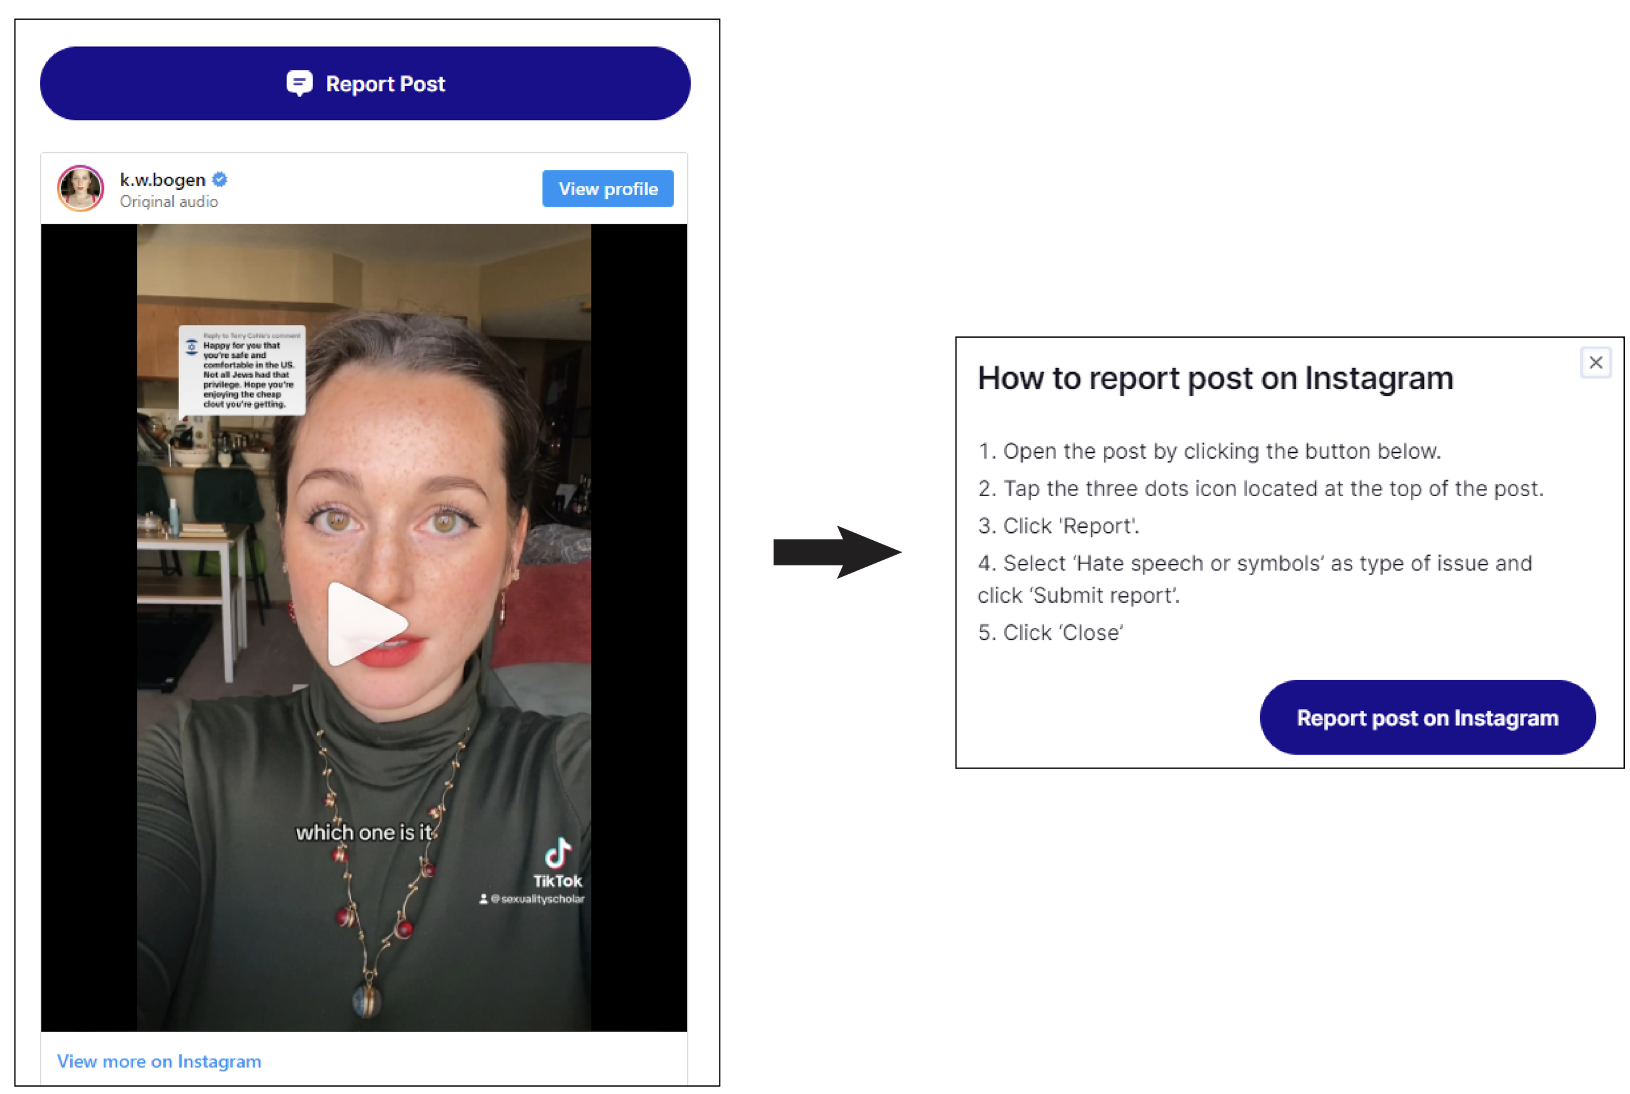 Screenshots from the WOI website of an Instagram post from video creator Katherine Wela Bogen (left) and generated reporting instructions for this video (right). (Source: wordsofiron.com, Instagram)